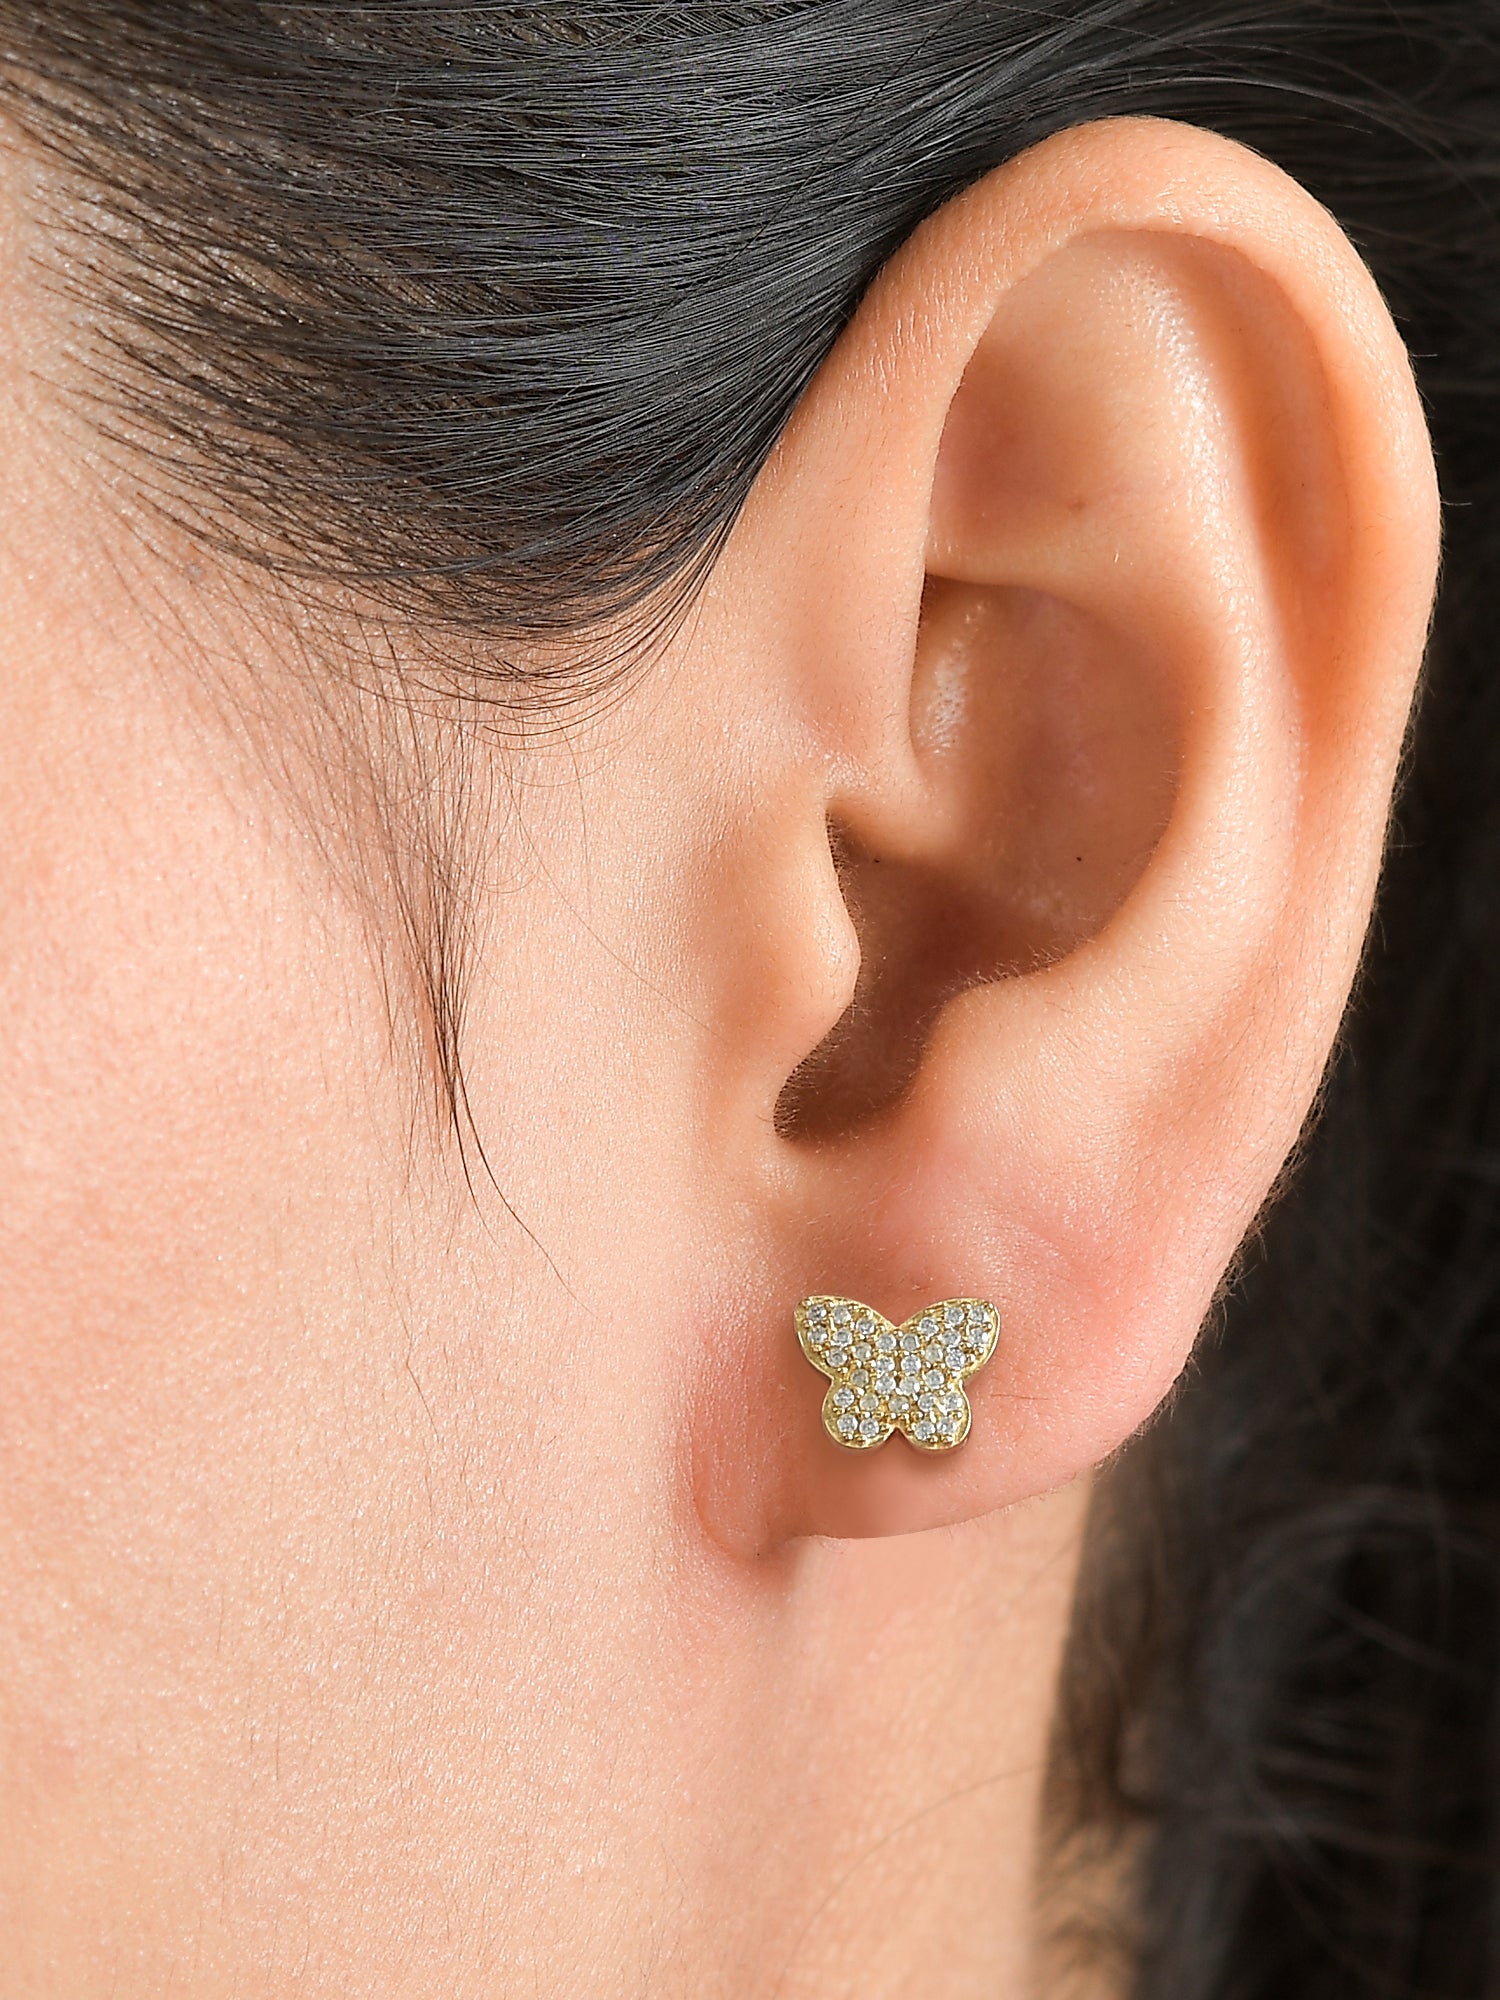 Yellow Gold Plated Silver Butterfly Diamond Look Earrings